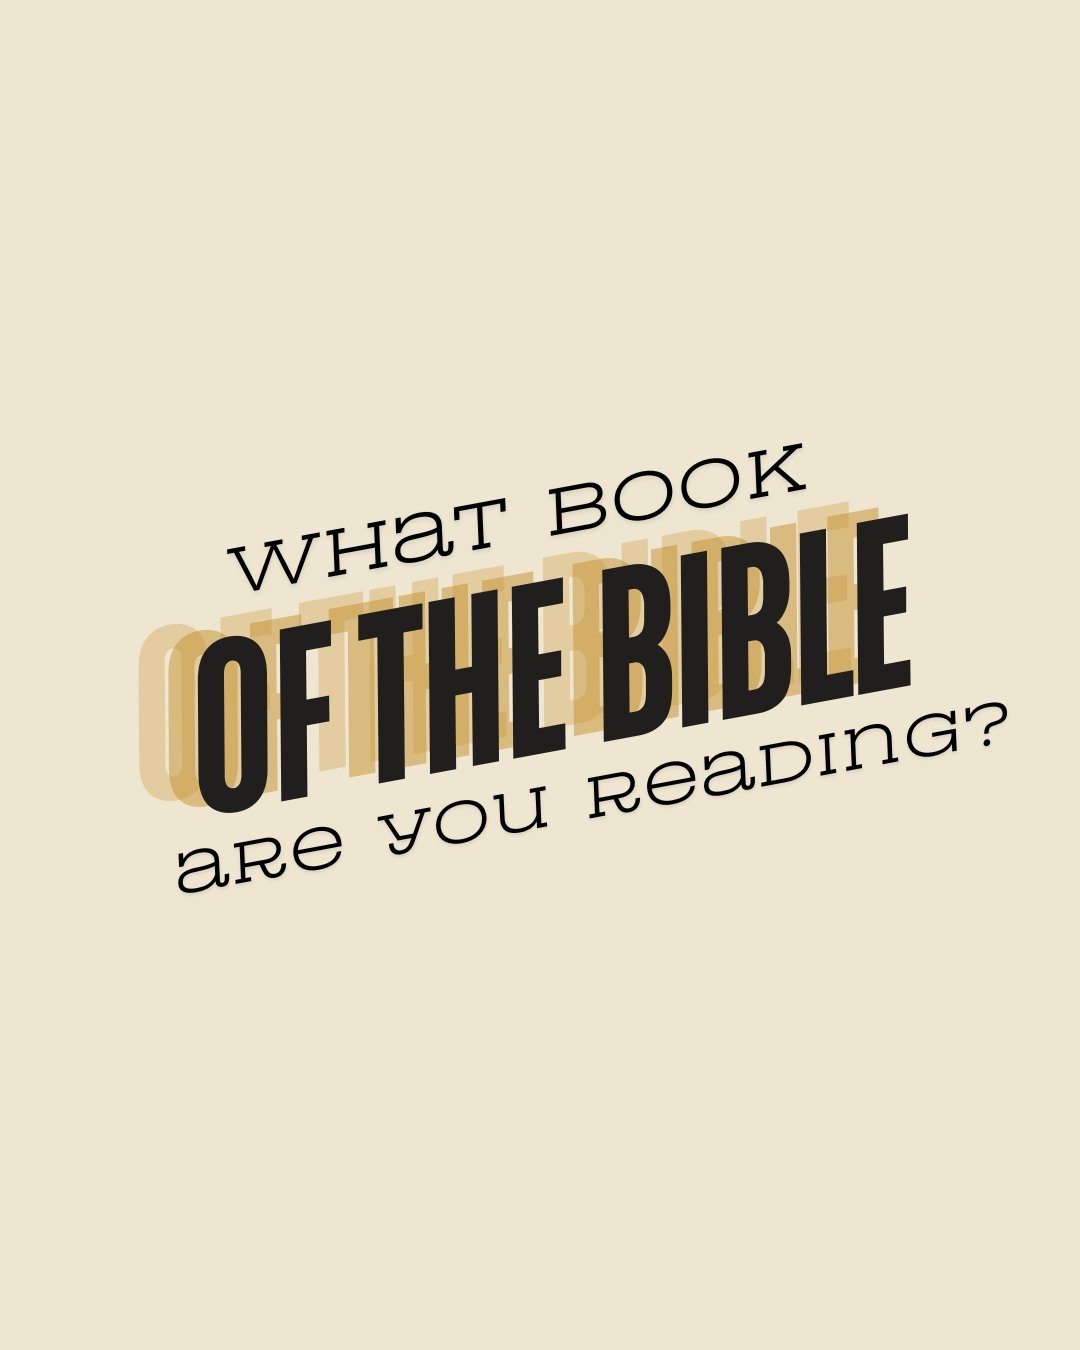 Share below! We want to know where you are in your Bible reading.

#biblestudy #Christiancommunity #biblereading